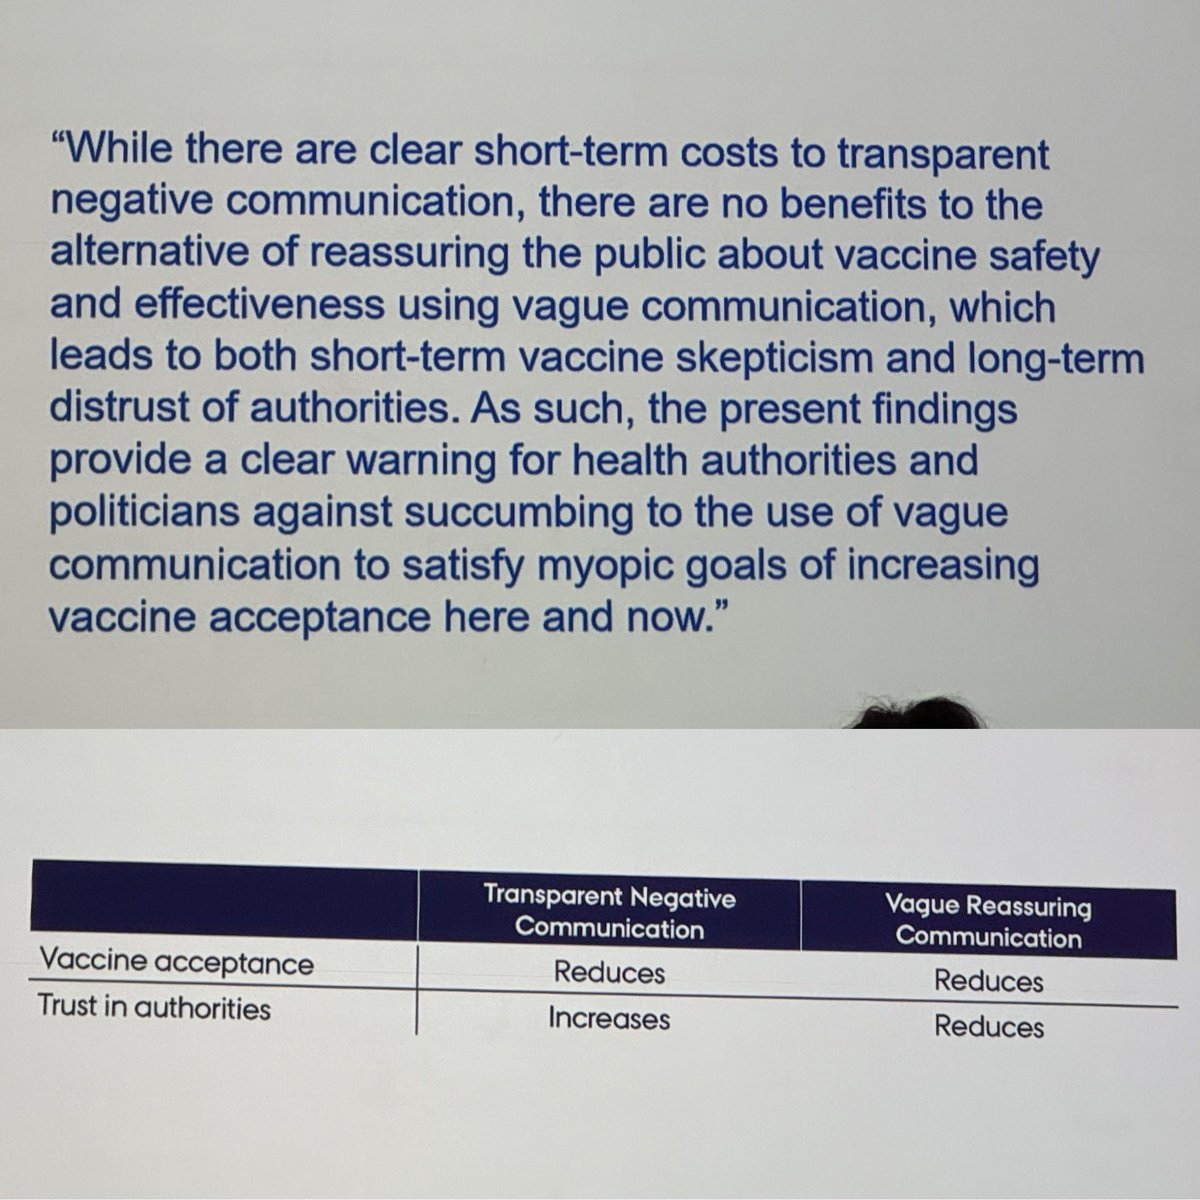 “There are no benefits to reassuring the public about vaccine safety and effectiveness using vague communication.” @kakape @ESCMID #ESCMIDGlobal2024 Not only true for vaccine safety and effectiveness but for communication on public health in general probably.